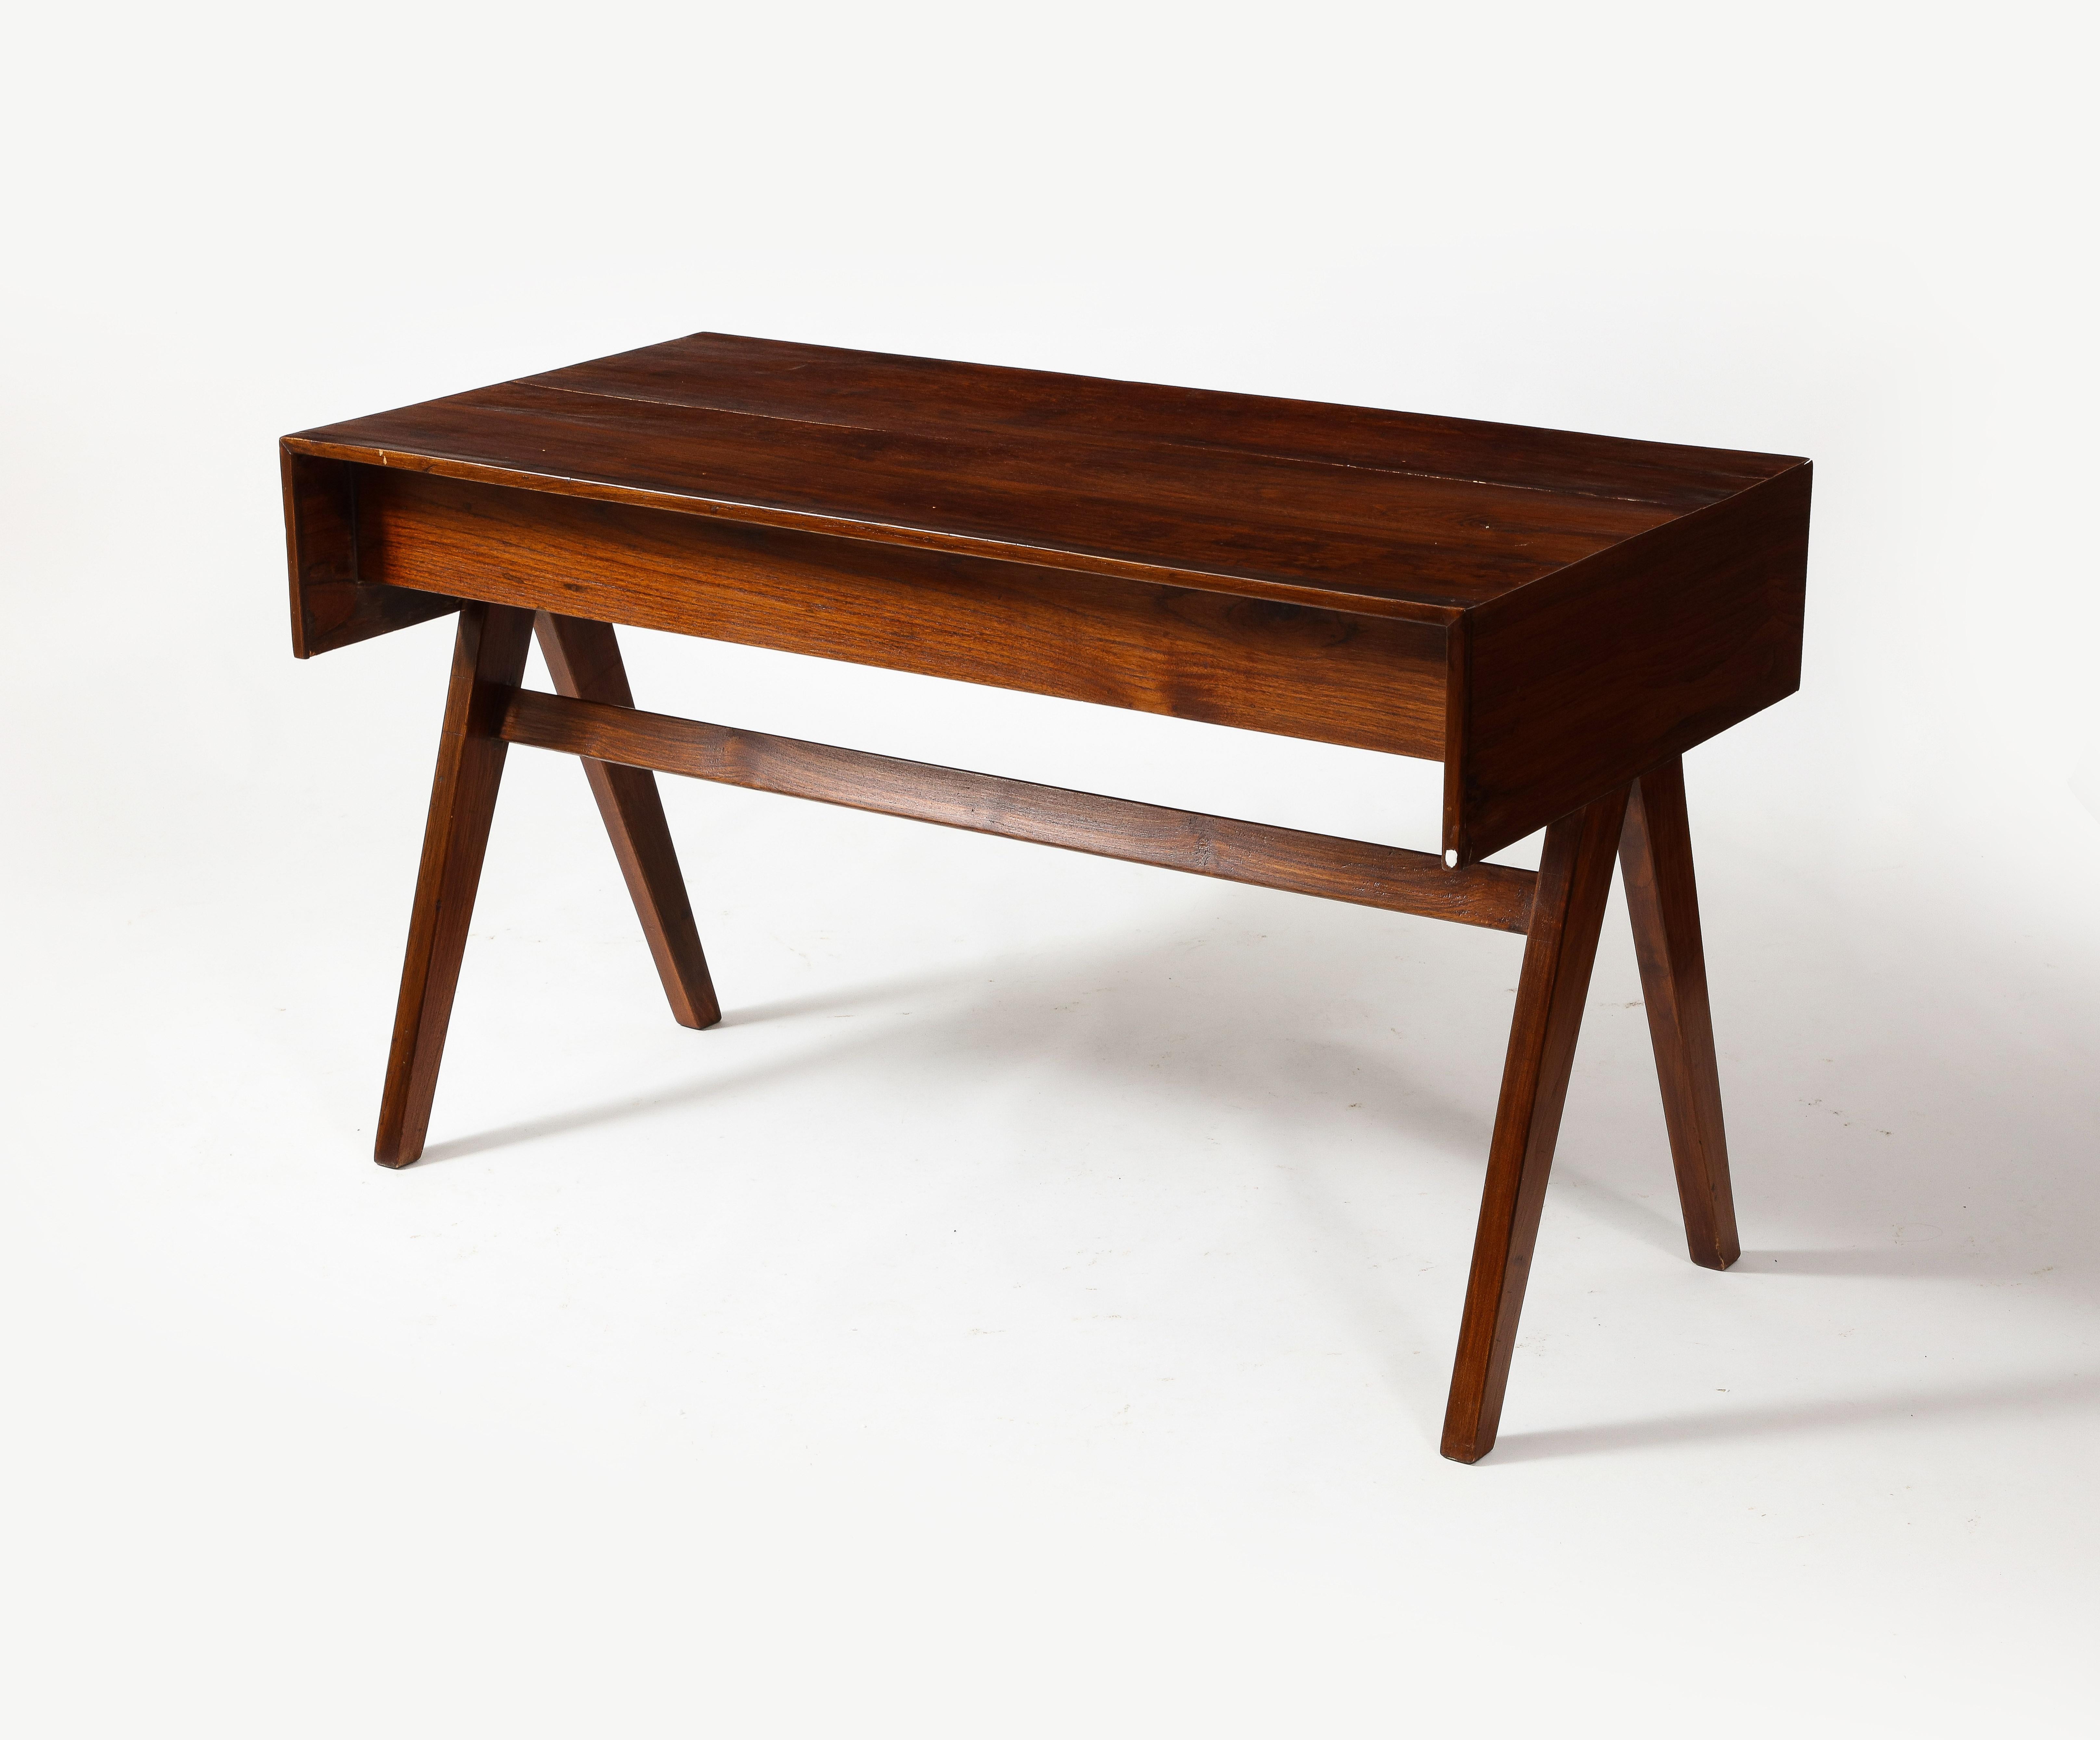 Undocumented but very much in the style of Pierre Jeanneret Style Mid-Century 'Student' Compass Desk, India 1960's.